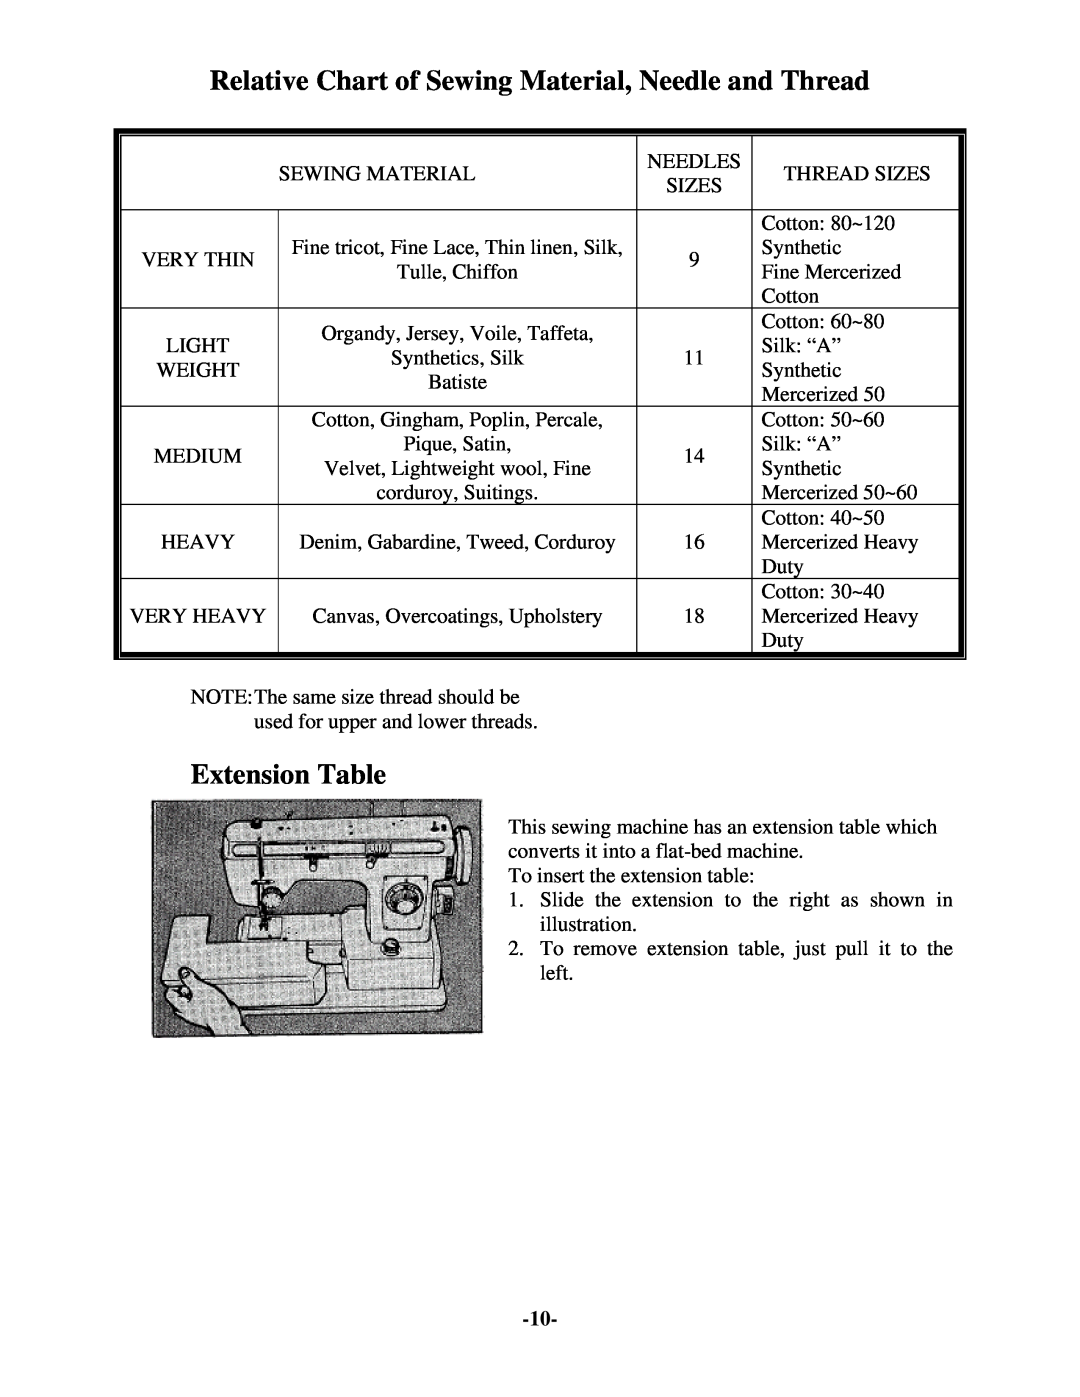 Brother 681B-UG manual Relative Chart of Sewing Material, Needle and Thread, Extension Table 